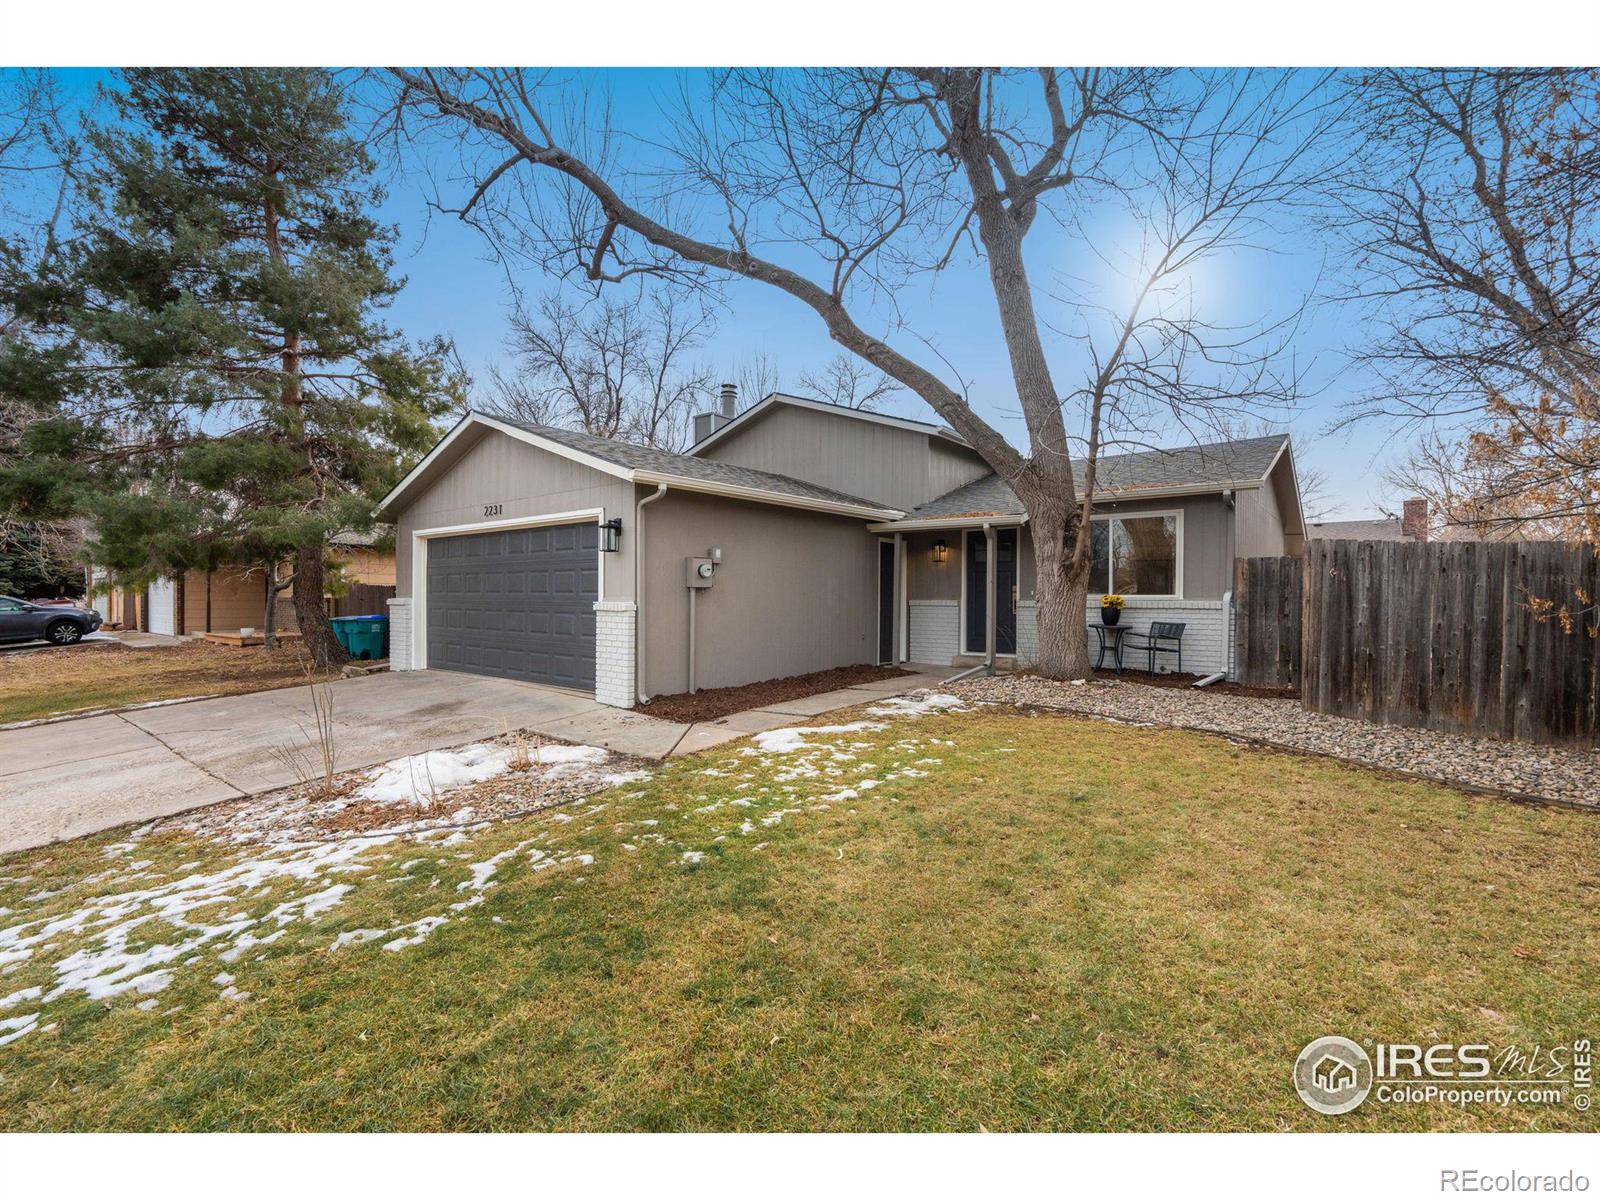 2231  Ayrshire Drive, fort collins MLS: 4567891002171 Beds: 3 Baths: 2 Price: $549,000